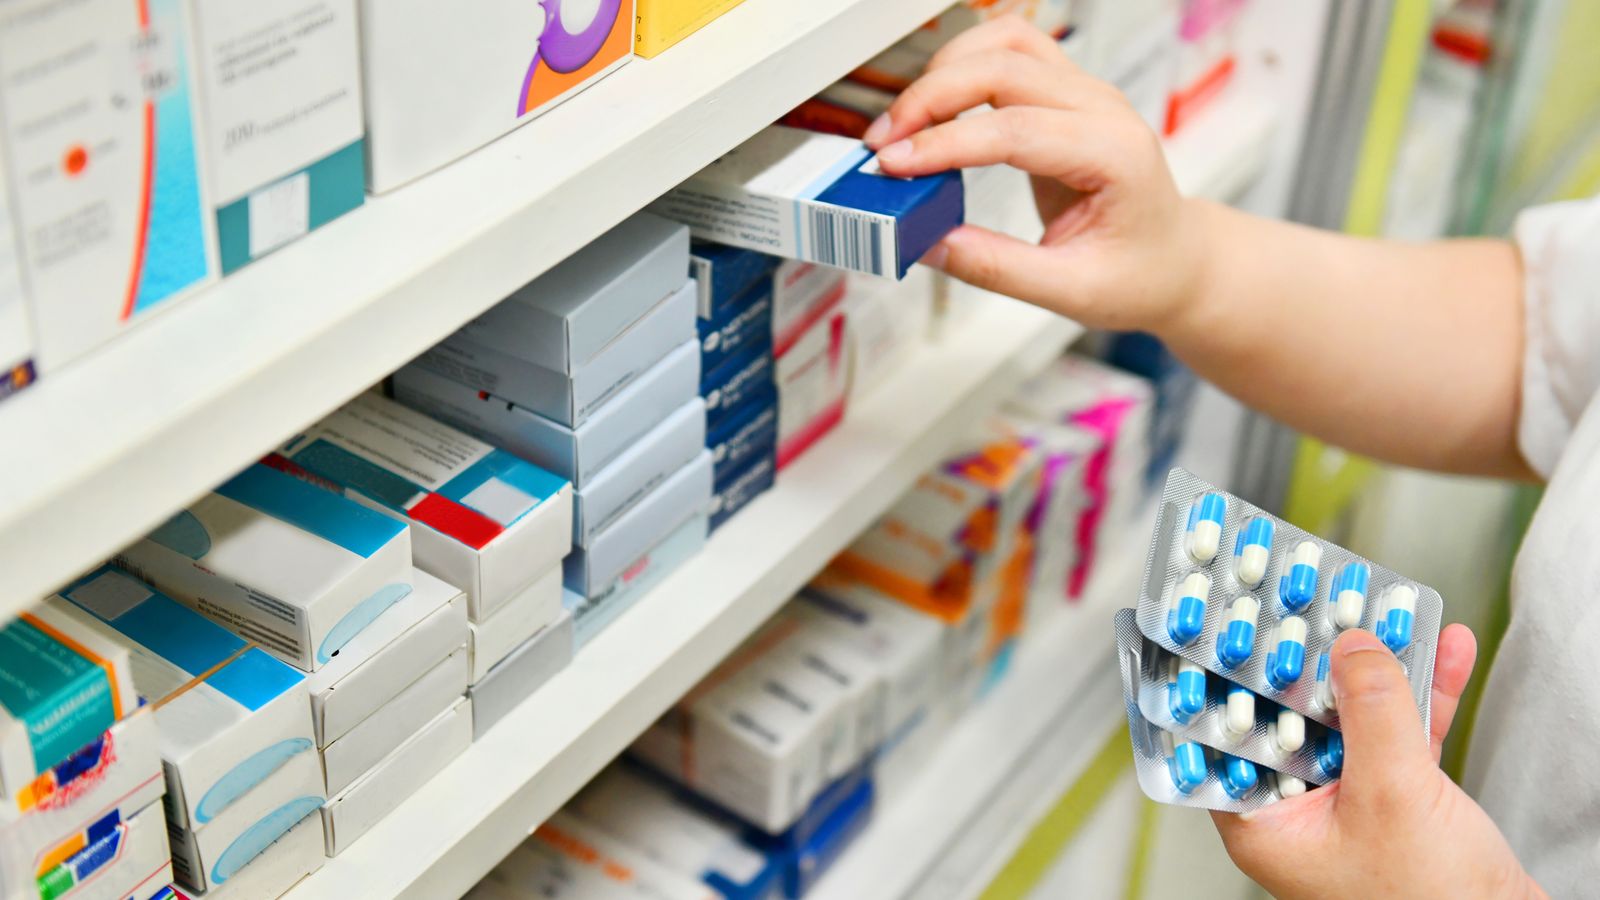 Patients forced into 'pharmacy bingo' - as survey says medicine shortages 'beyond critical'